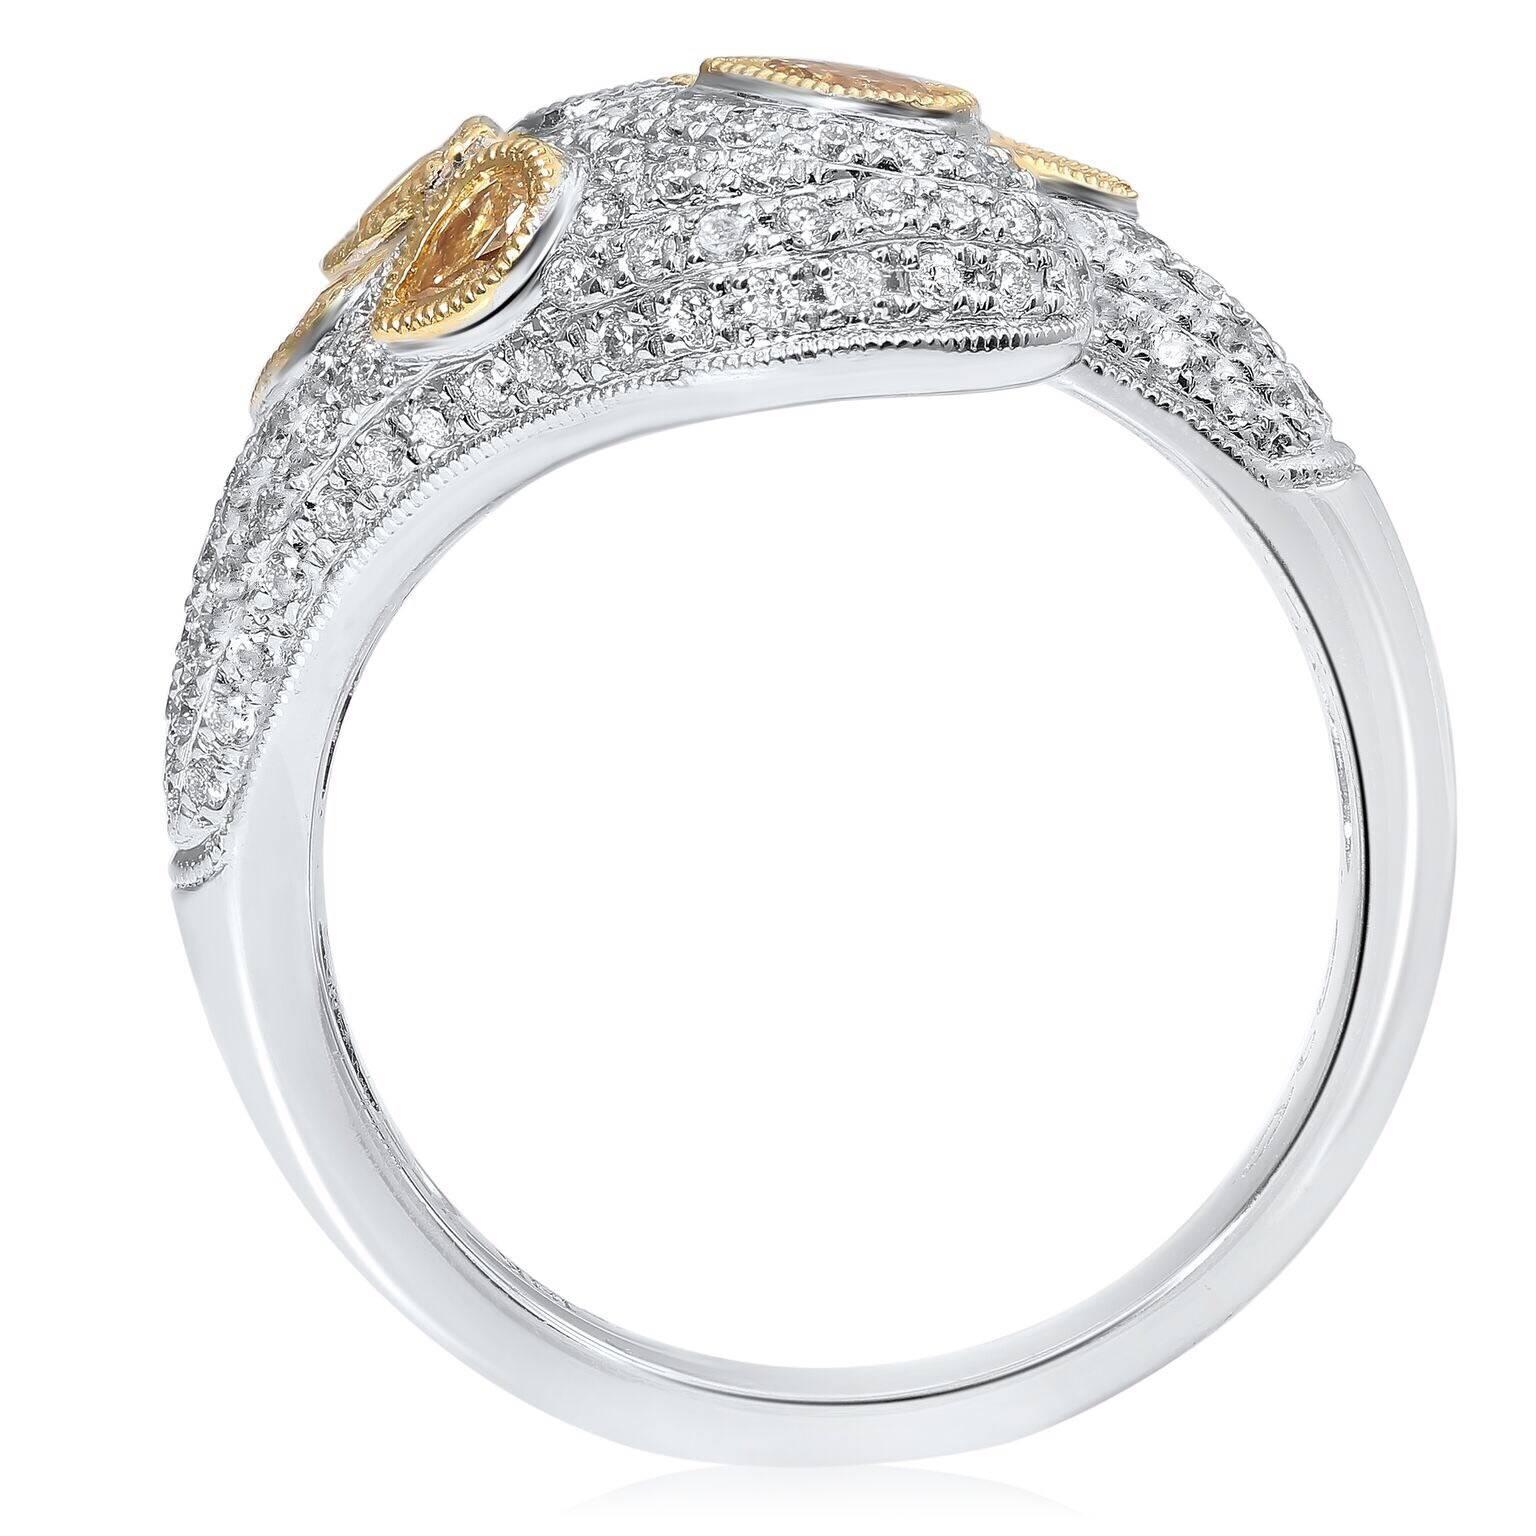 Pear shaped diamonds float on a glistening sea of white diamond pave. The contrast between the rich golden colored diamonds and the scintillating white diamonds evoke opulence. Perfect for casual wear and evening formal ensembles alike. Consider